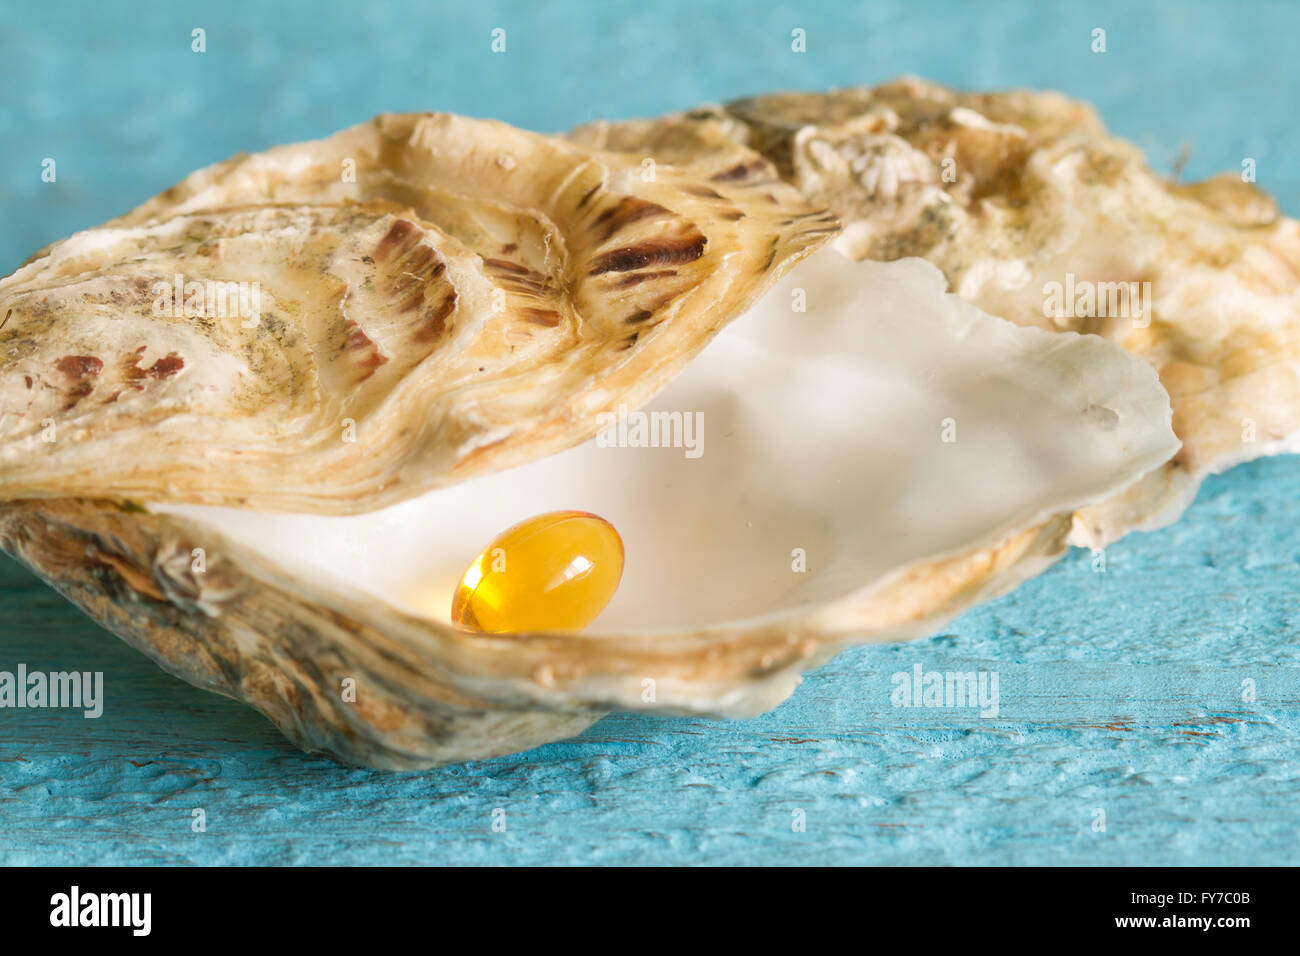 Omega 3 pill in oyster like pearl diet concept Stock Photo